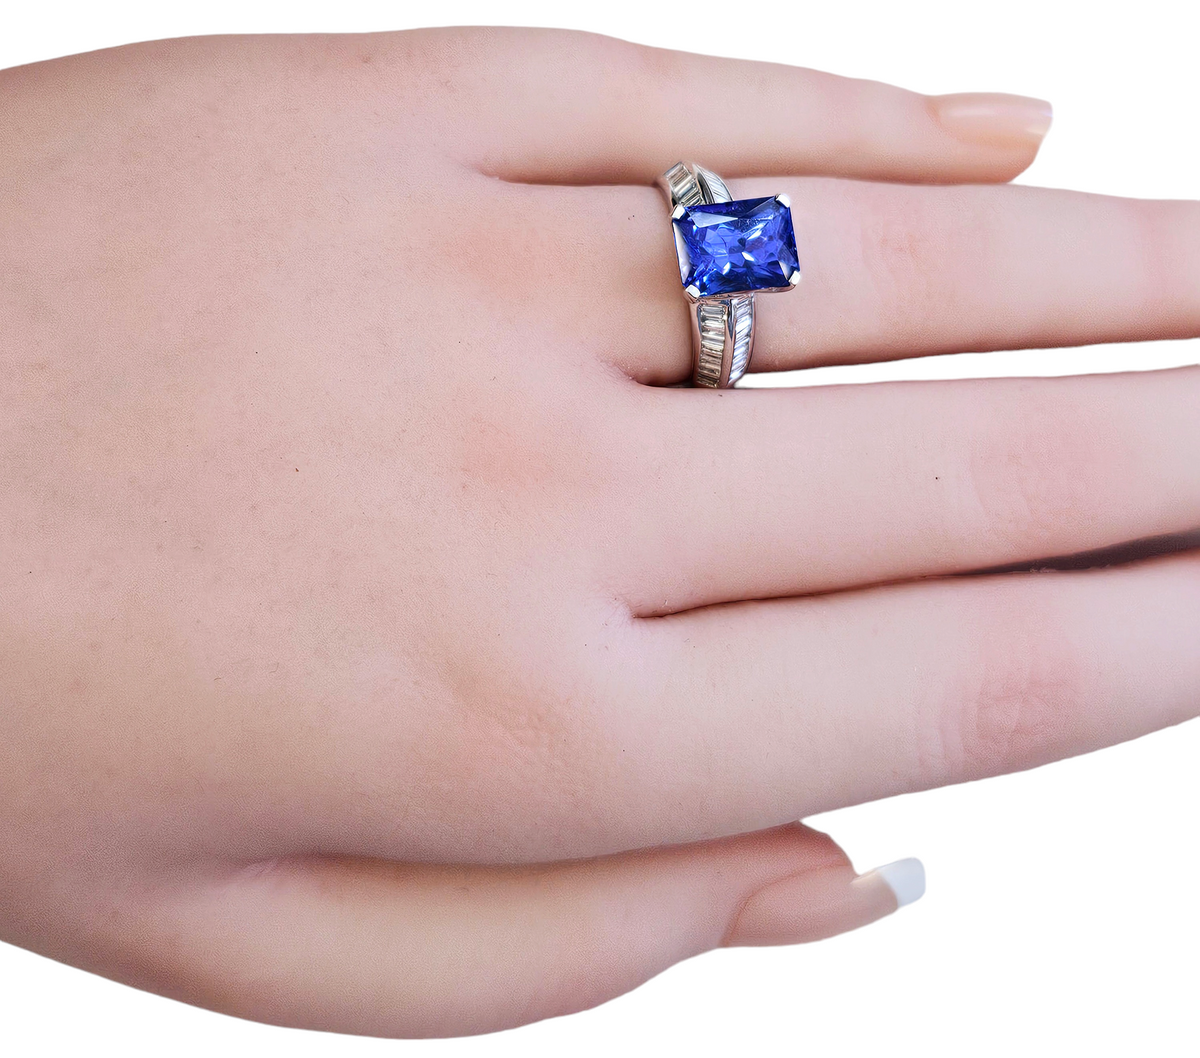 Radiant Cut Tanzanite and Channel Set Baguette Diamond Ring made in 18-Karat White Gold